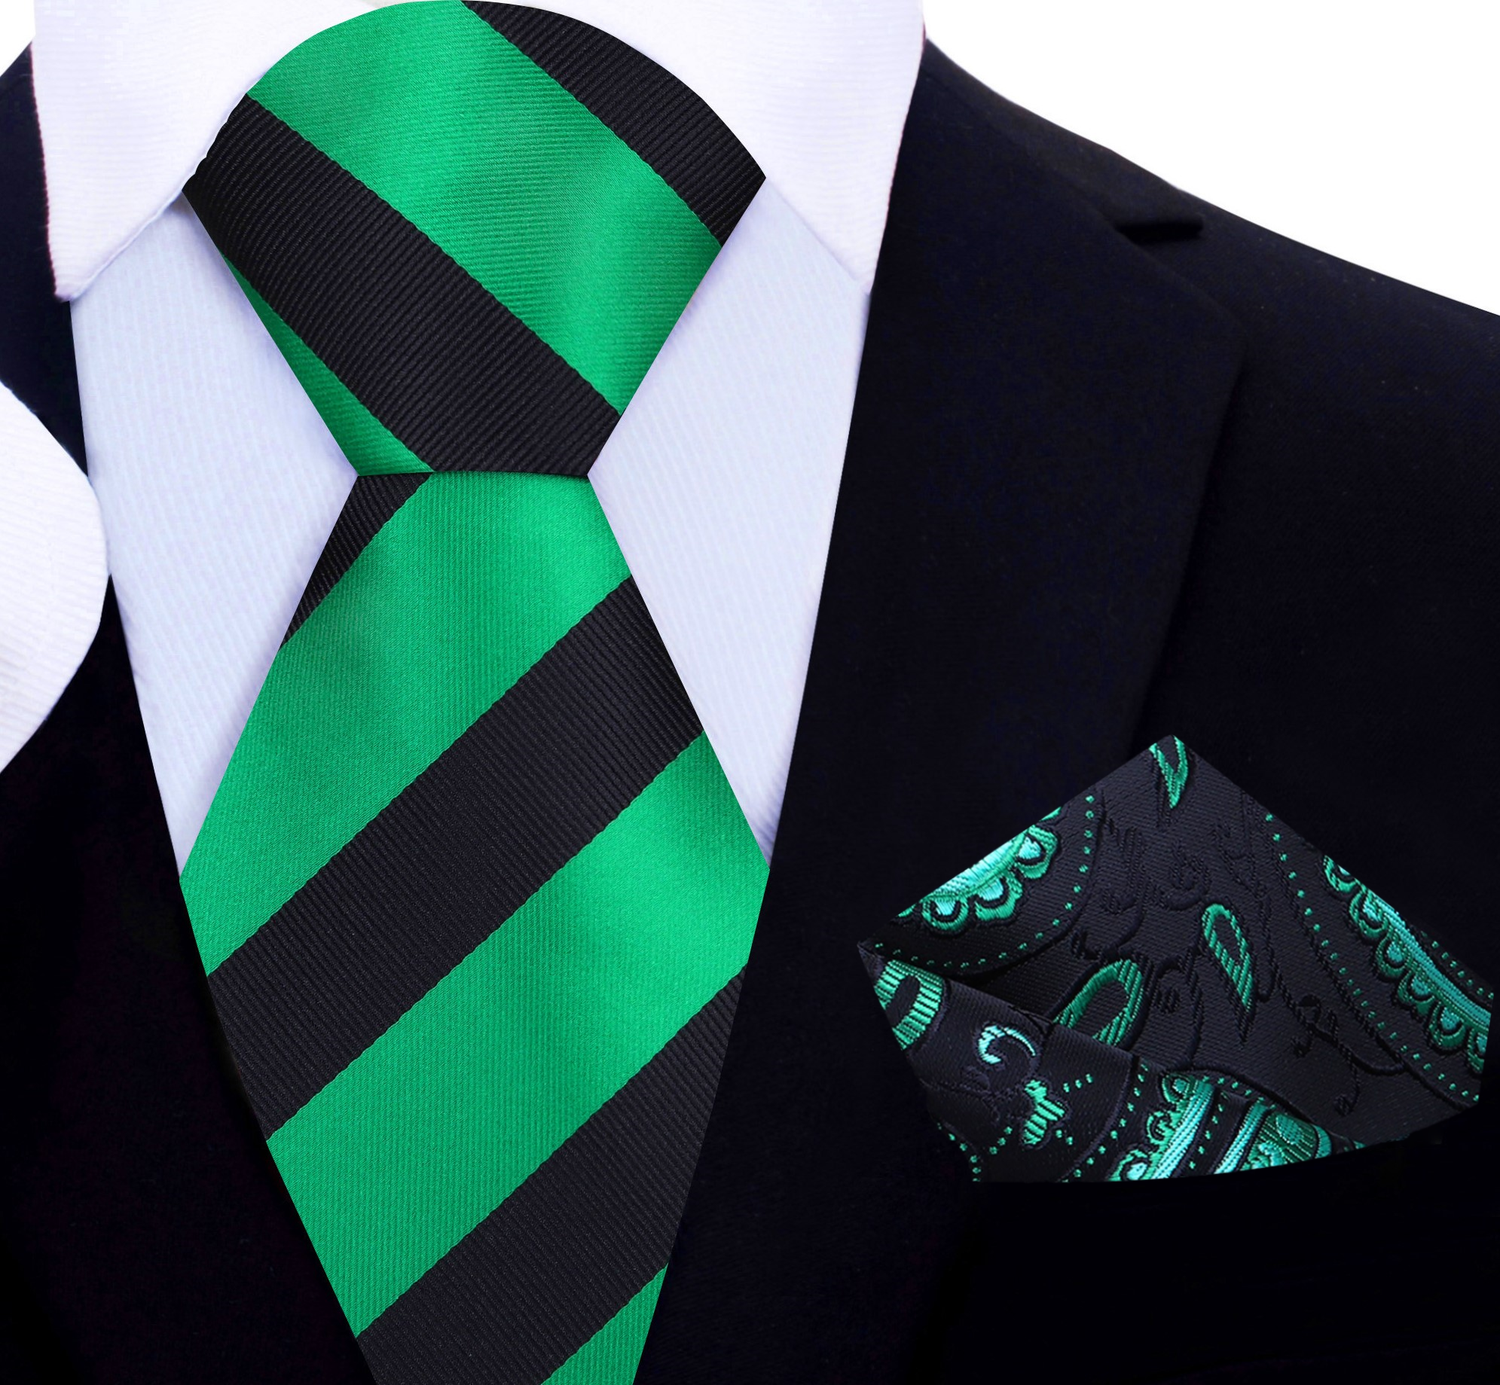 Black, Green Block Stripe Tie and Black and Green Paisley Pocket Square